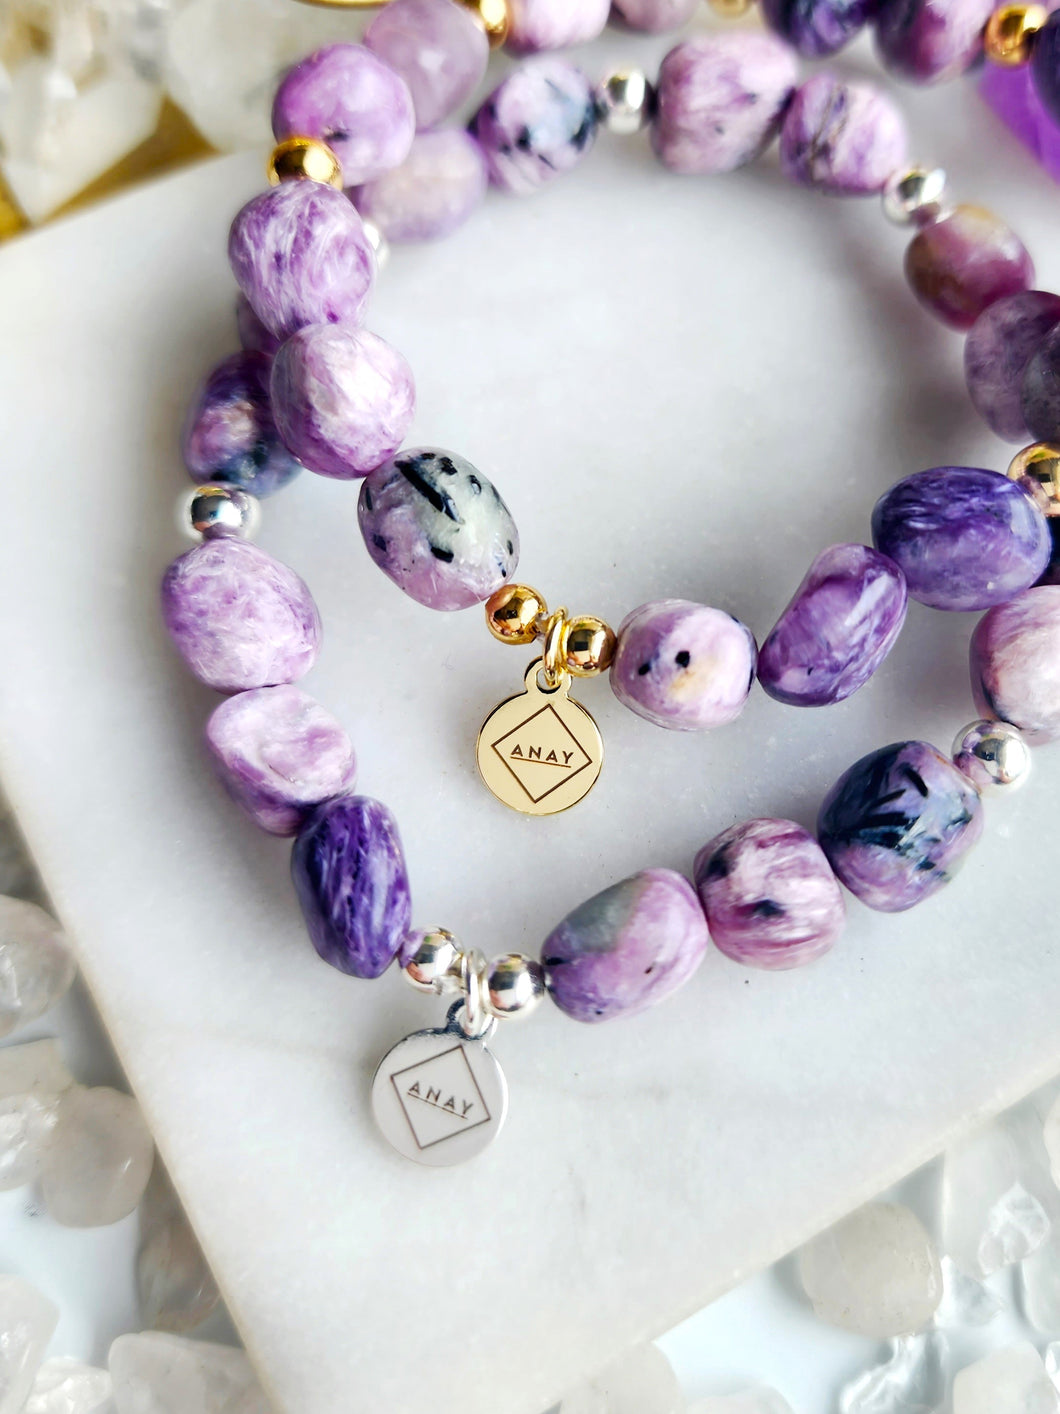  Discover transformation with Charoite, a revered stone known for profound spiritual properties. It facilitates growth, releases old patterns, and promotes spiritual insight and balance, unlocking a sacred realm of self-discovery and personal evolution